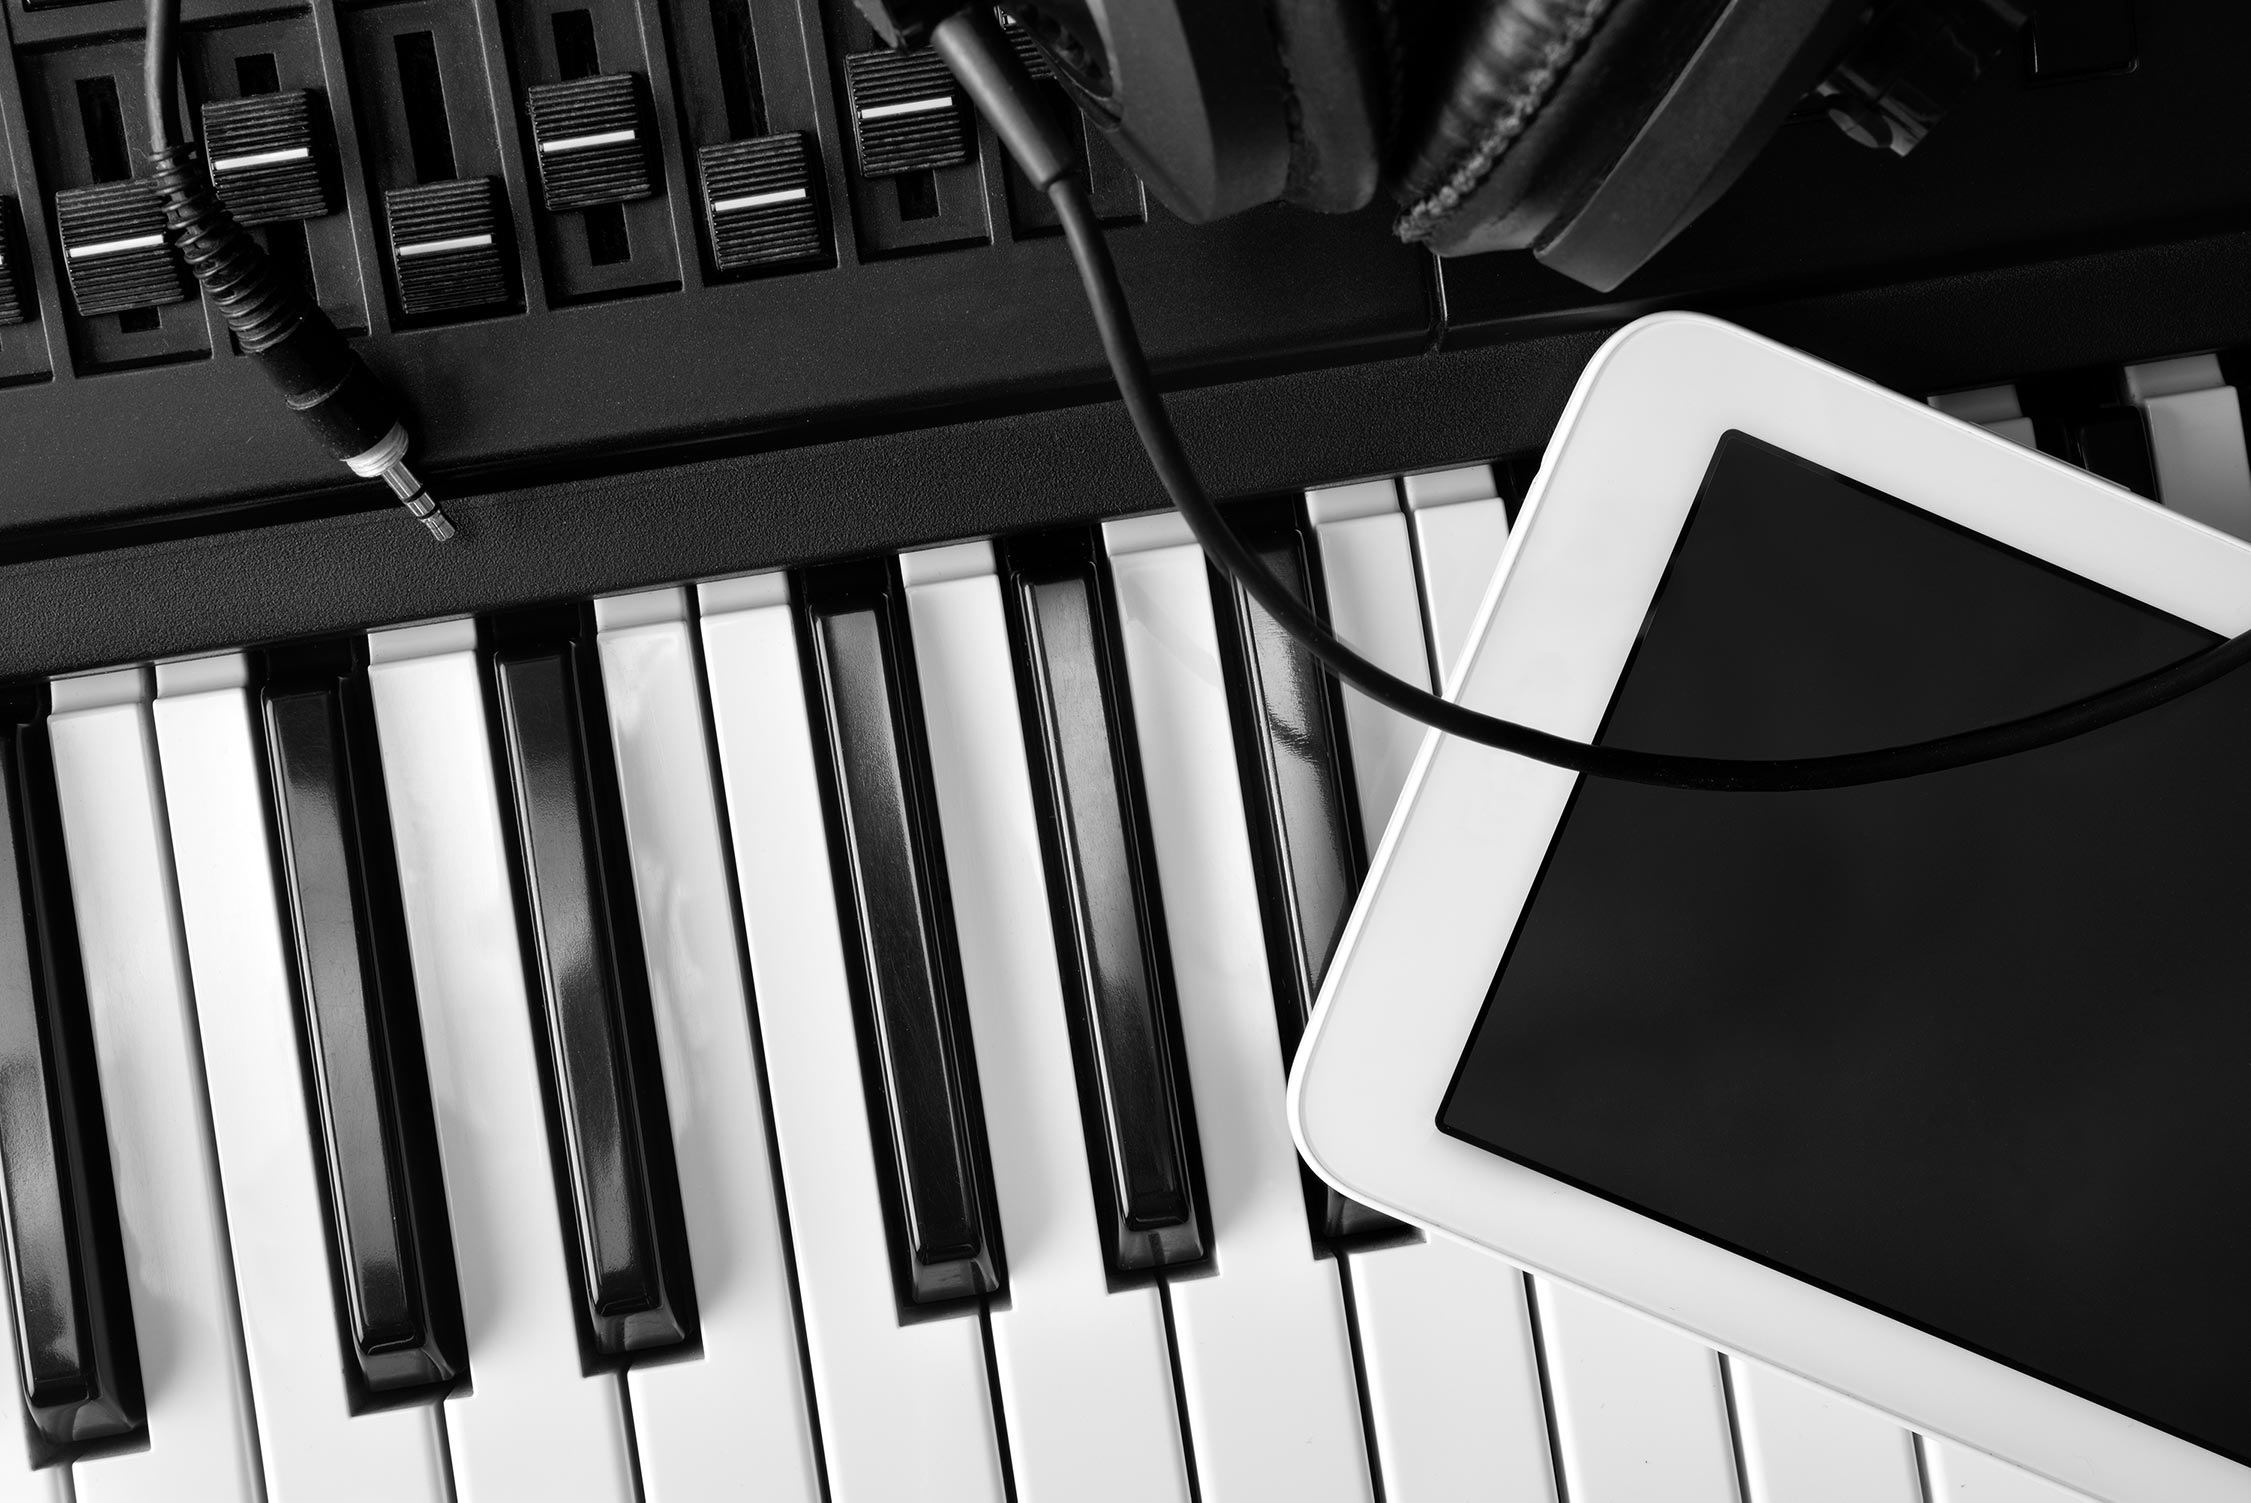 keyboard-tablet-mixer-bw Uncategorised - Smooth Chords | Music instruction videos